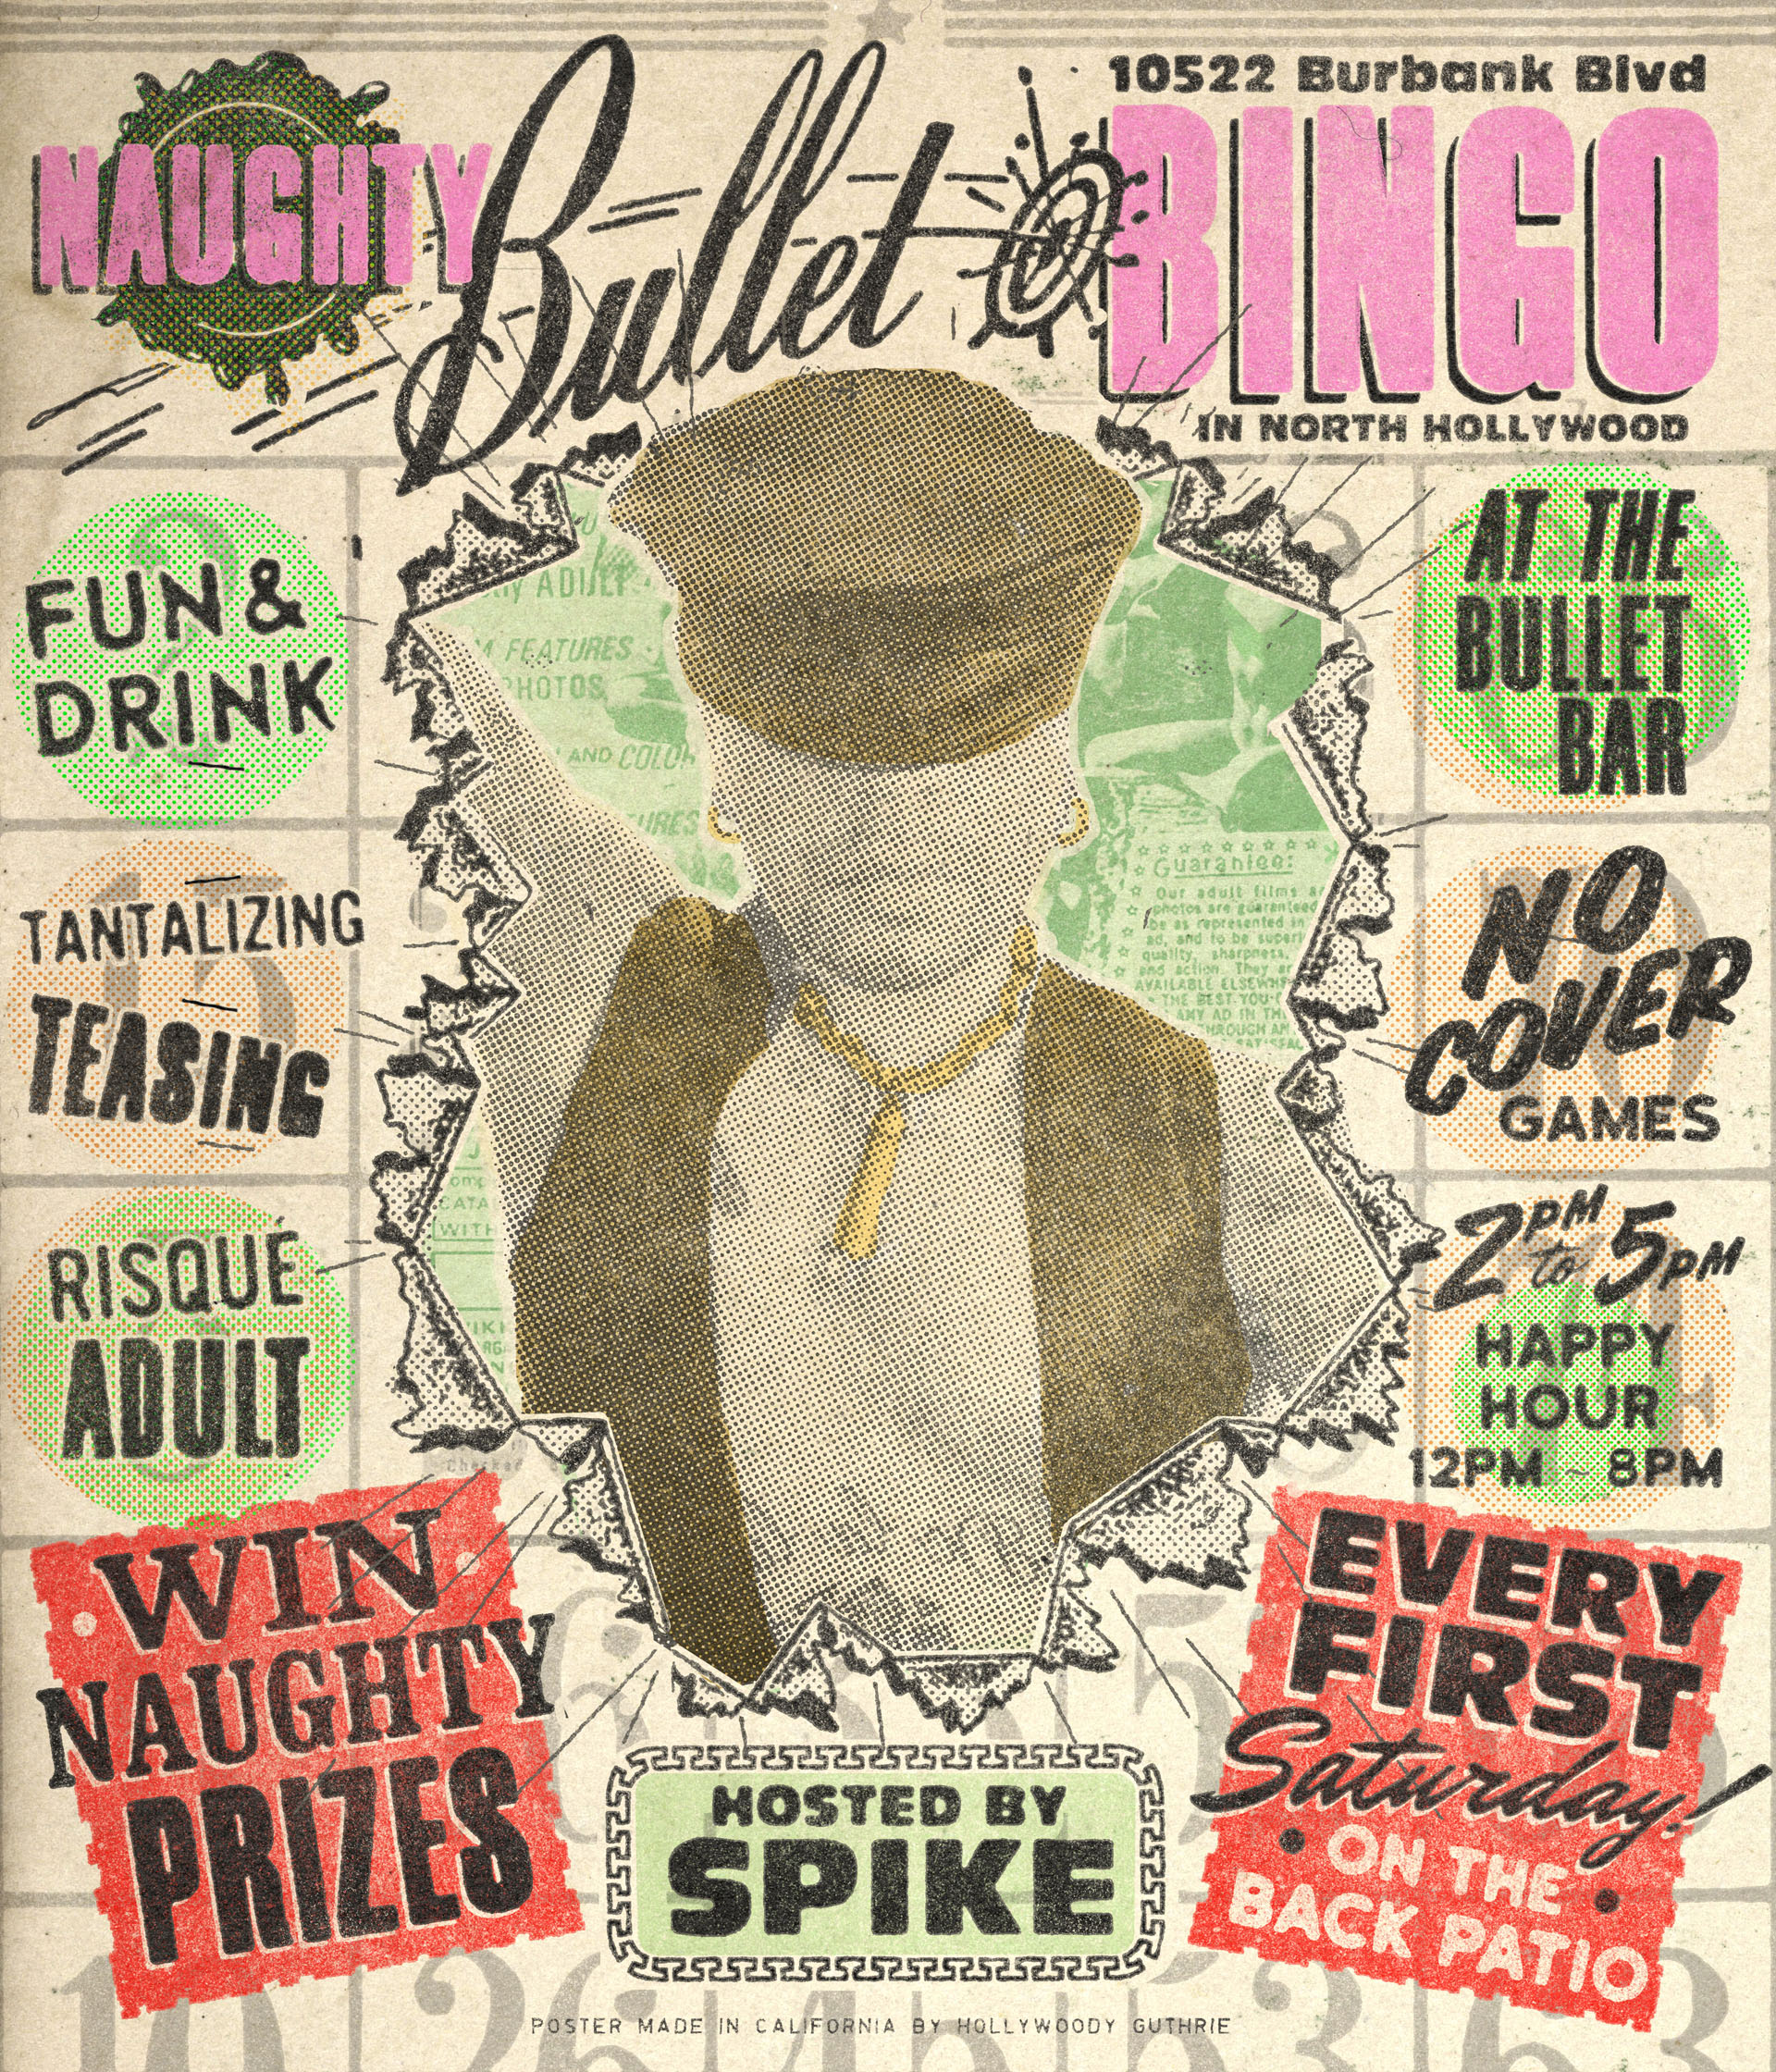 THE BULLET BAR Presents NAUGHTY BULLET BINGO Hosted by SPIKE: Every first Saturday, from 2:00 PM to 5:00 PM! Win NAUGHTY PRIZES! No cover.